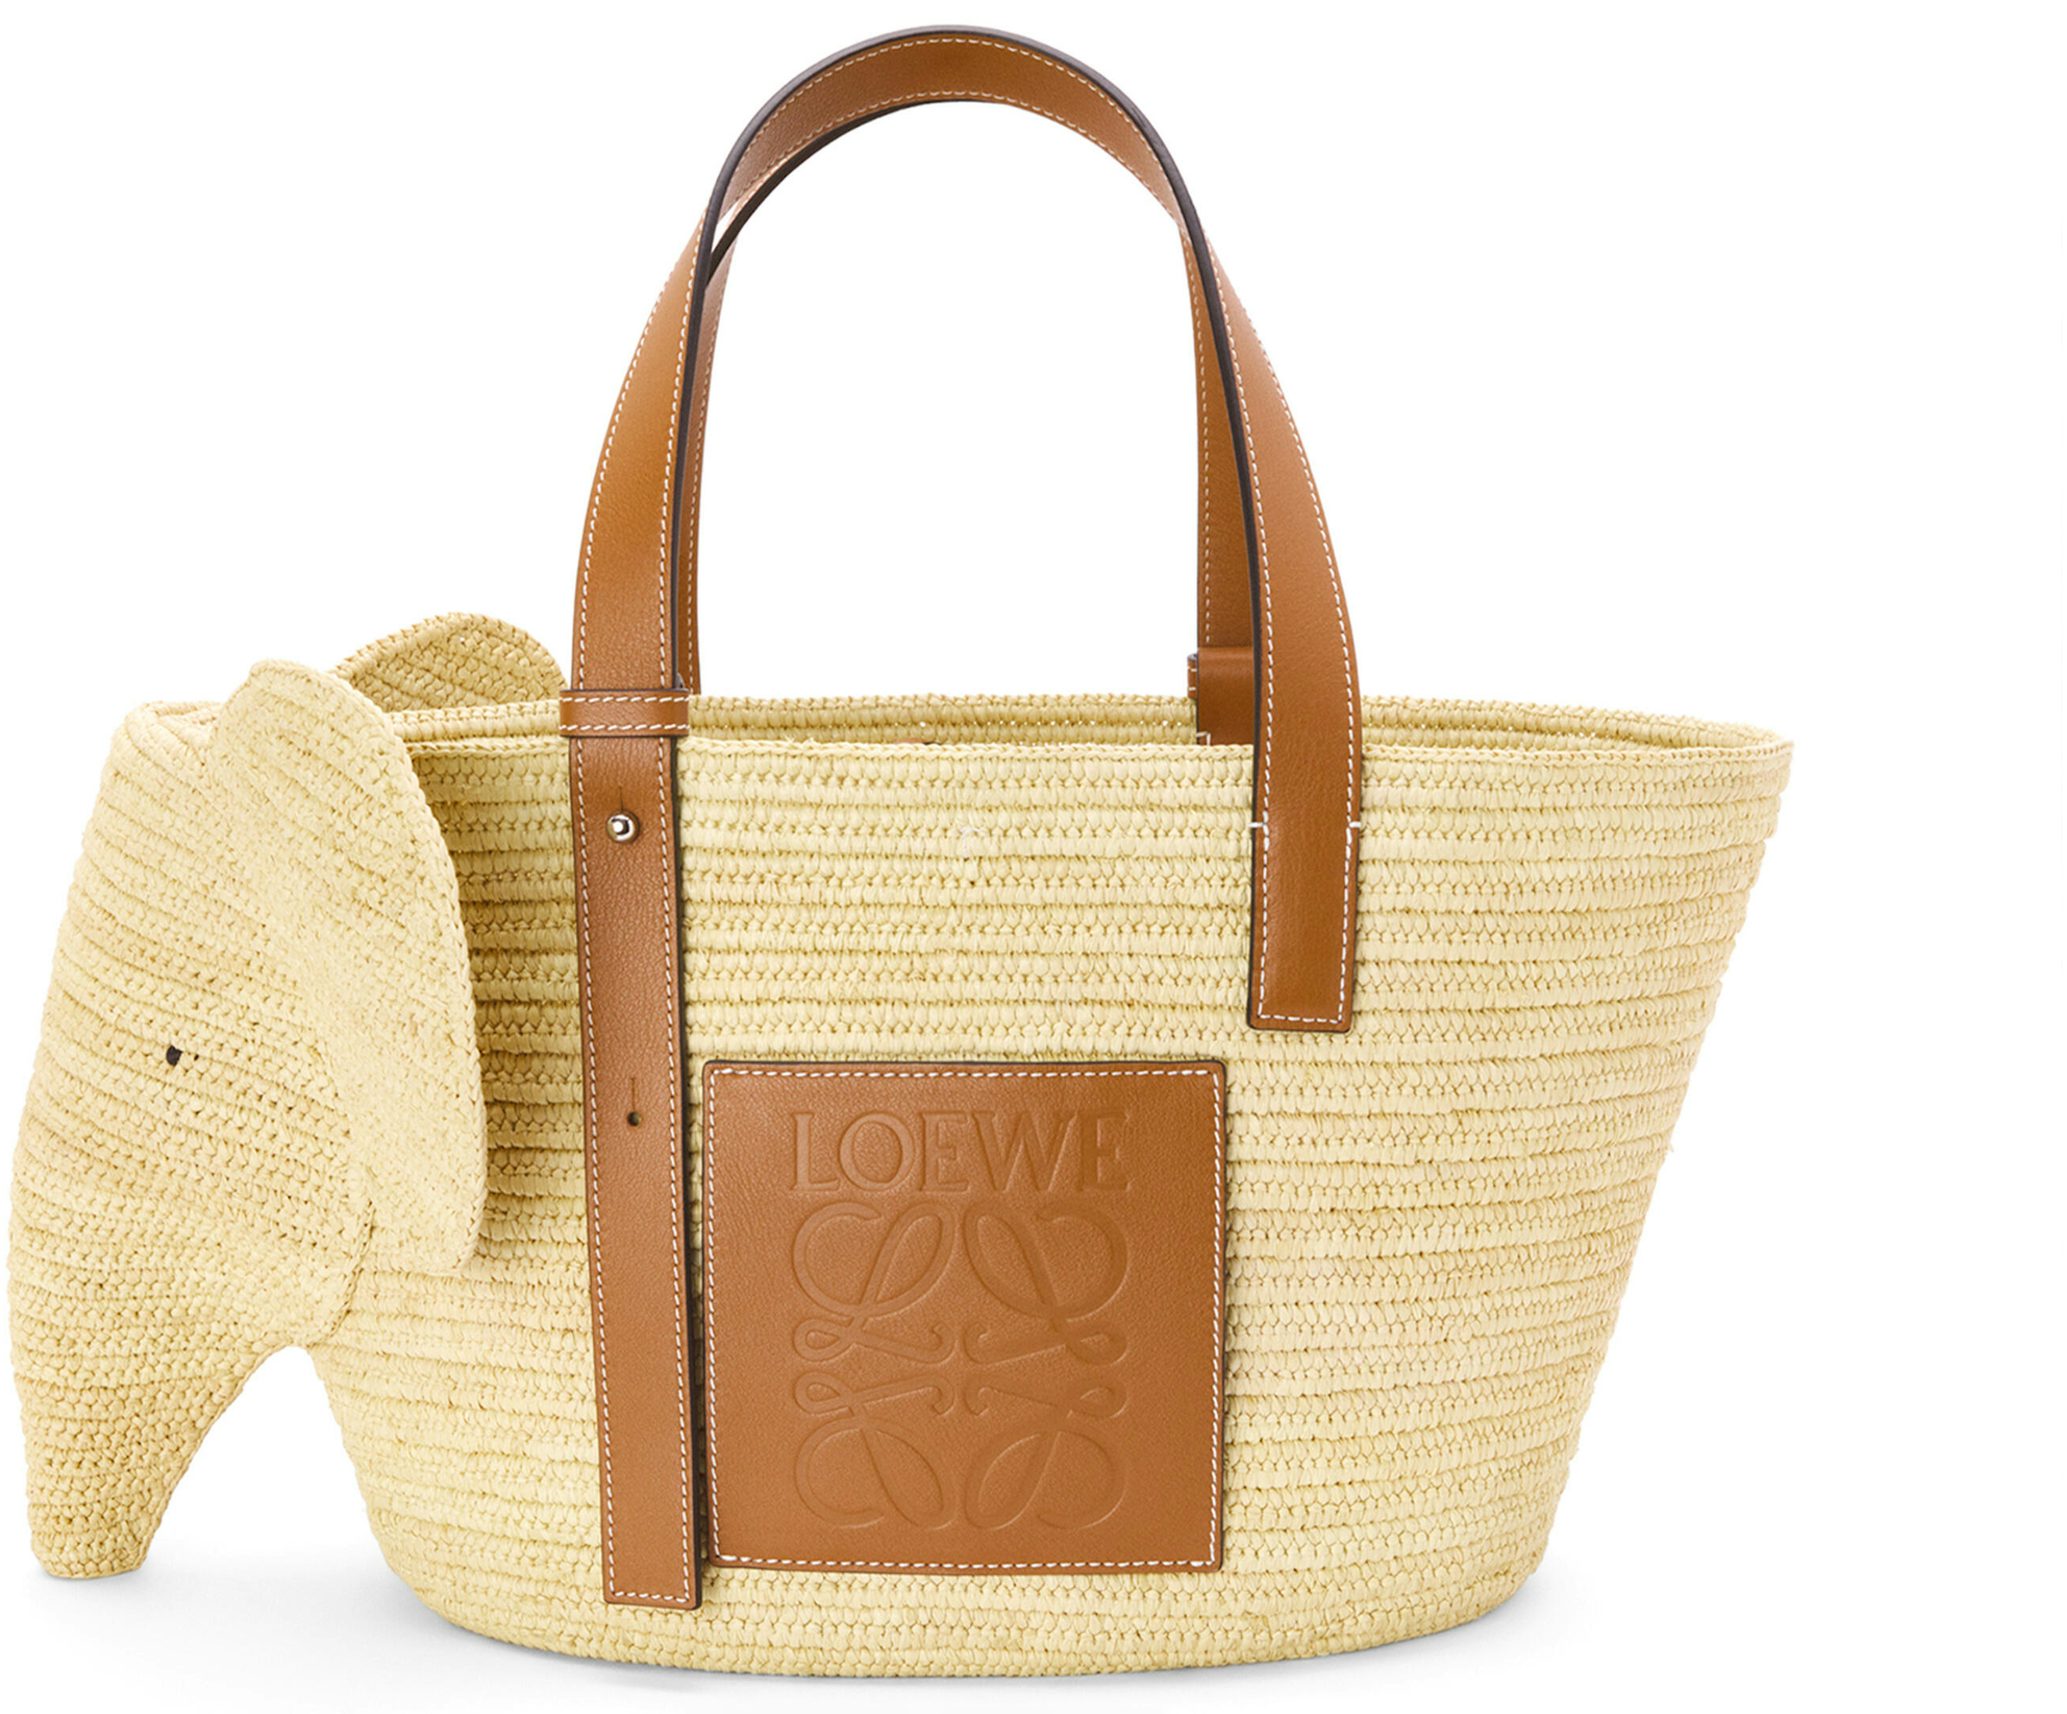 Loewe Women's Small Leather-trimmed Woven Basket Bag - Dark Yellow